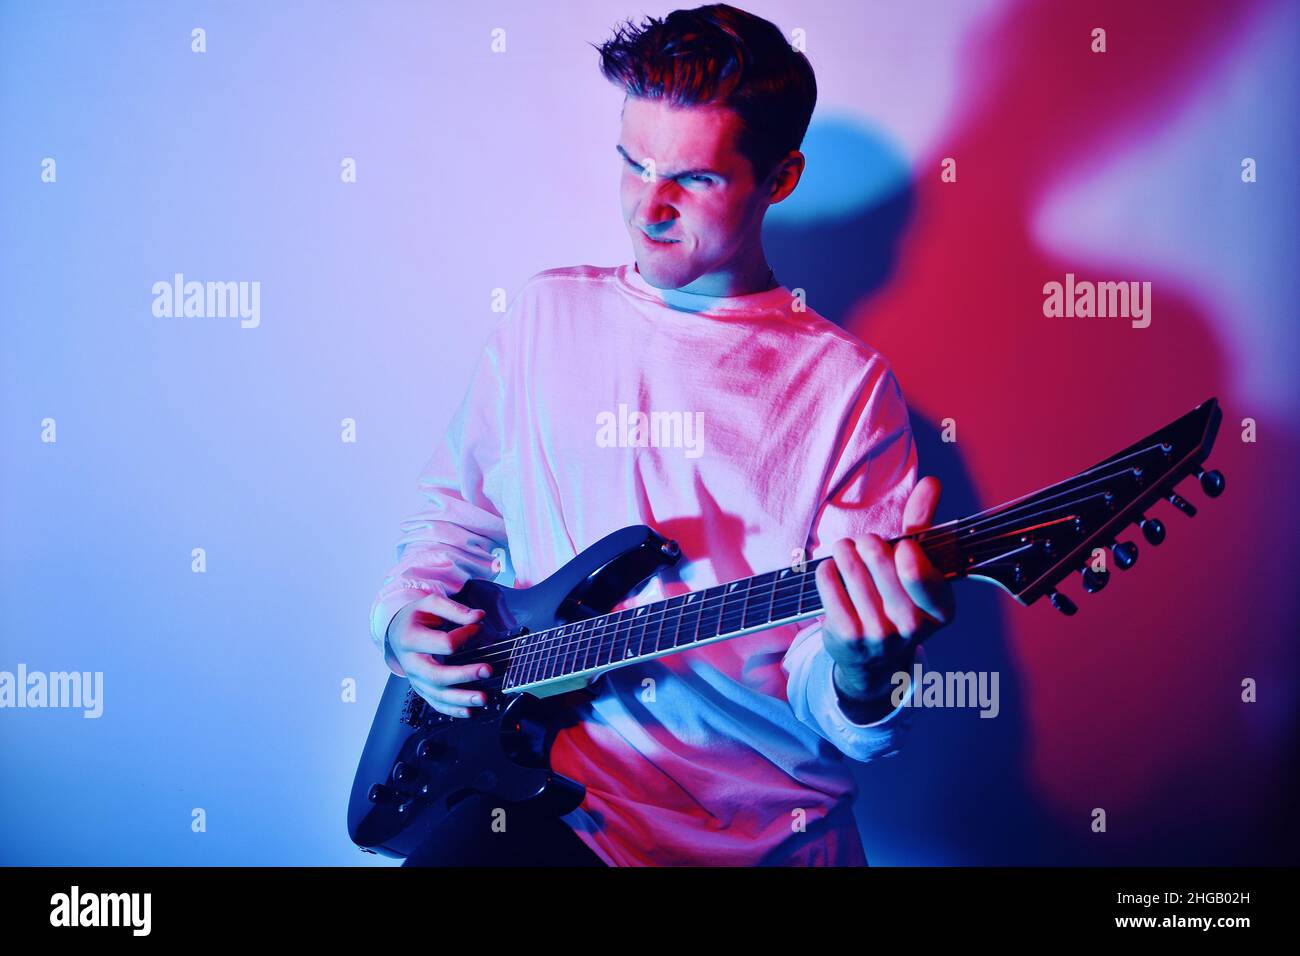 A man plays the electric guitar in neon light, red blue light. Hobbies, music, club. A man enjoys playing the guitar, screaming, vivid emotions. Stock Photo